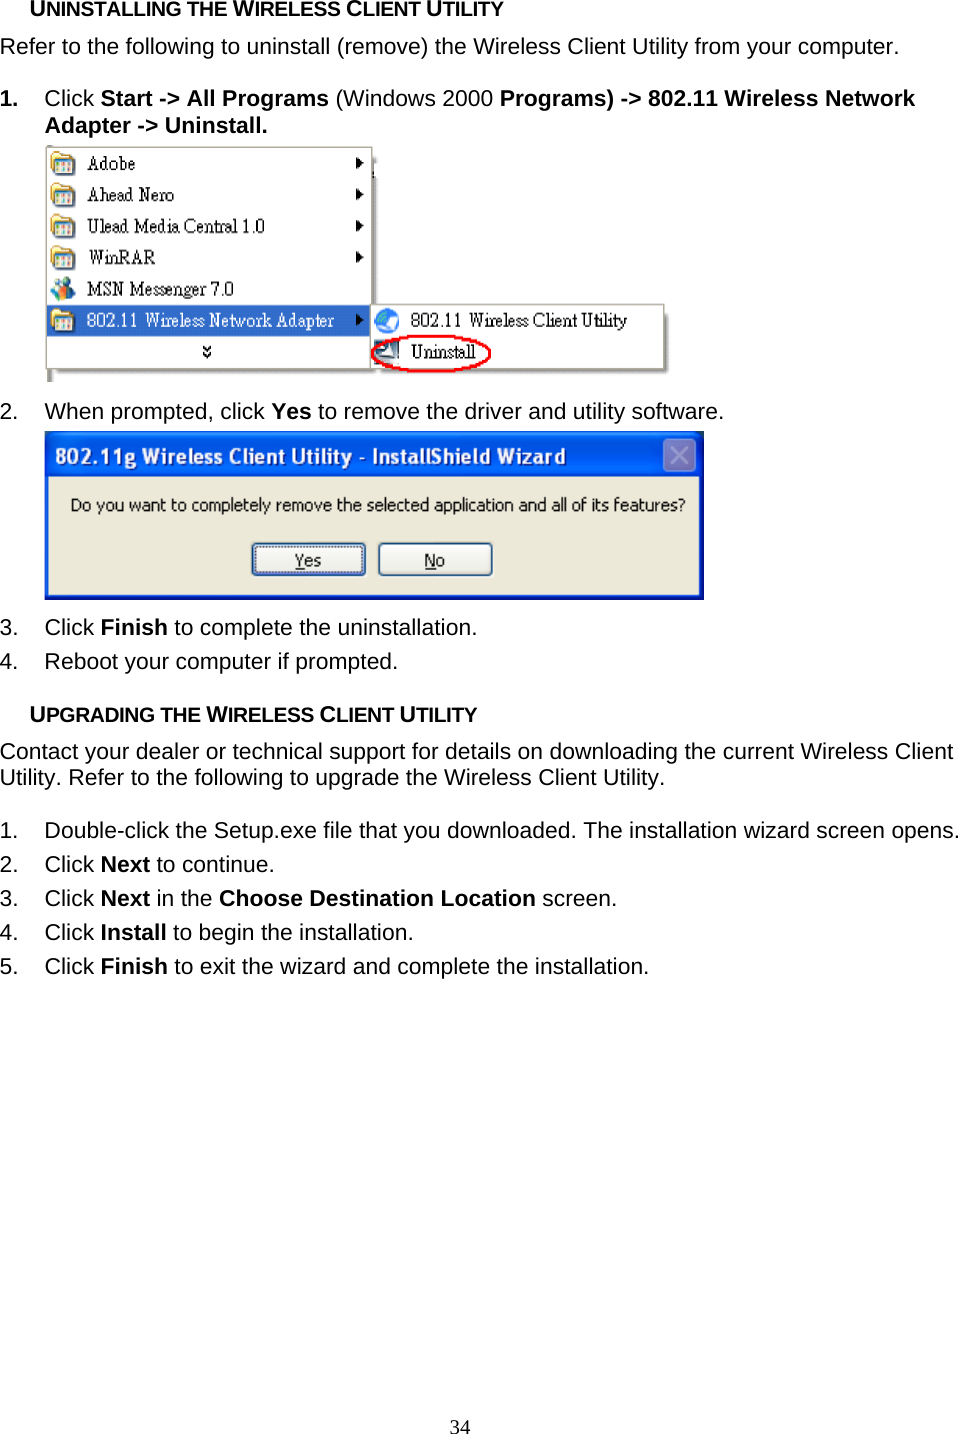       34 UNINSTALLING THE WIRELESS CLIENT UTILITY Refer to the following to uninstall (remove) the Wireless Client Utility from your computer.  1.  Click Start -&gt; All Programs (Windows 2000 Programs) -&gt; 802.11 Wireless Network Adapter -&gt; Uninstall.  2.  When prompted, click Yes to remove the driver and utility software.  3. Click Finish to complete the uninstallation. 4.  Reboot your computer if prompted.  UPGRADING THE WIRELESS CLIENT UTILITY Contact your dealer or technical support for details on downloading the current Wireless Client Utility. Refer to the following to upgrade the Wireless Client Utility.  1.  Double-click the Setup.exe file that you downloaded. The installation wizard screen opens. 2. Click Next to continue. 3. Click Next in the Choose Destination Location screen. 4. Click Install to begin the installation. 5. Click Finish to exit the wizard and complete the installation. 